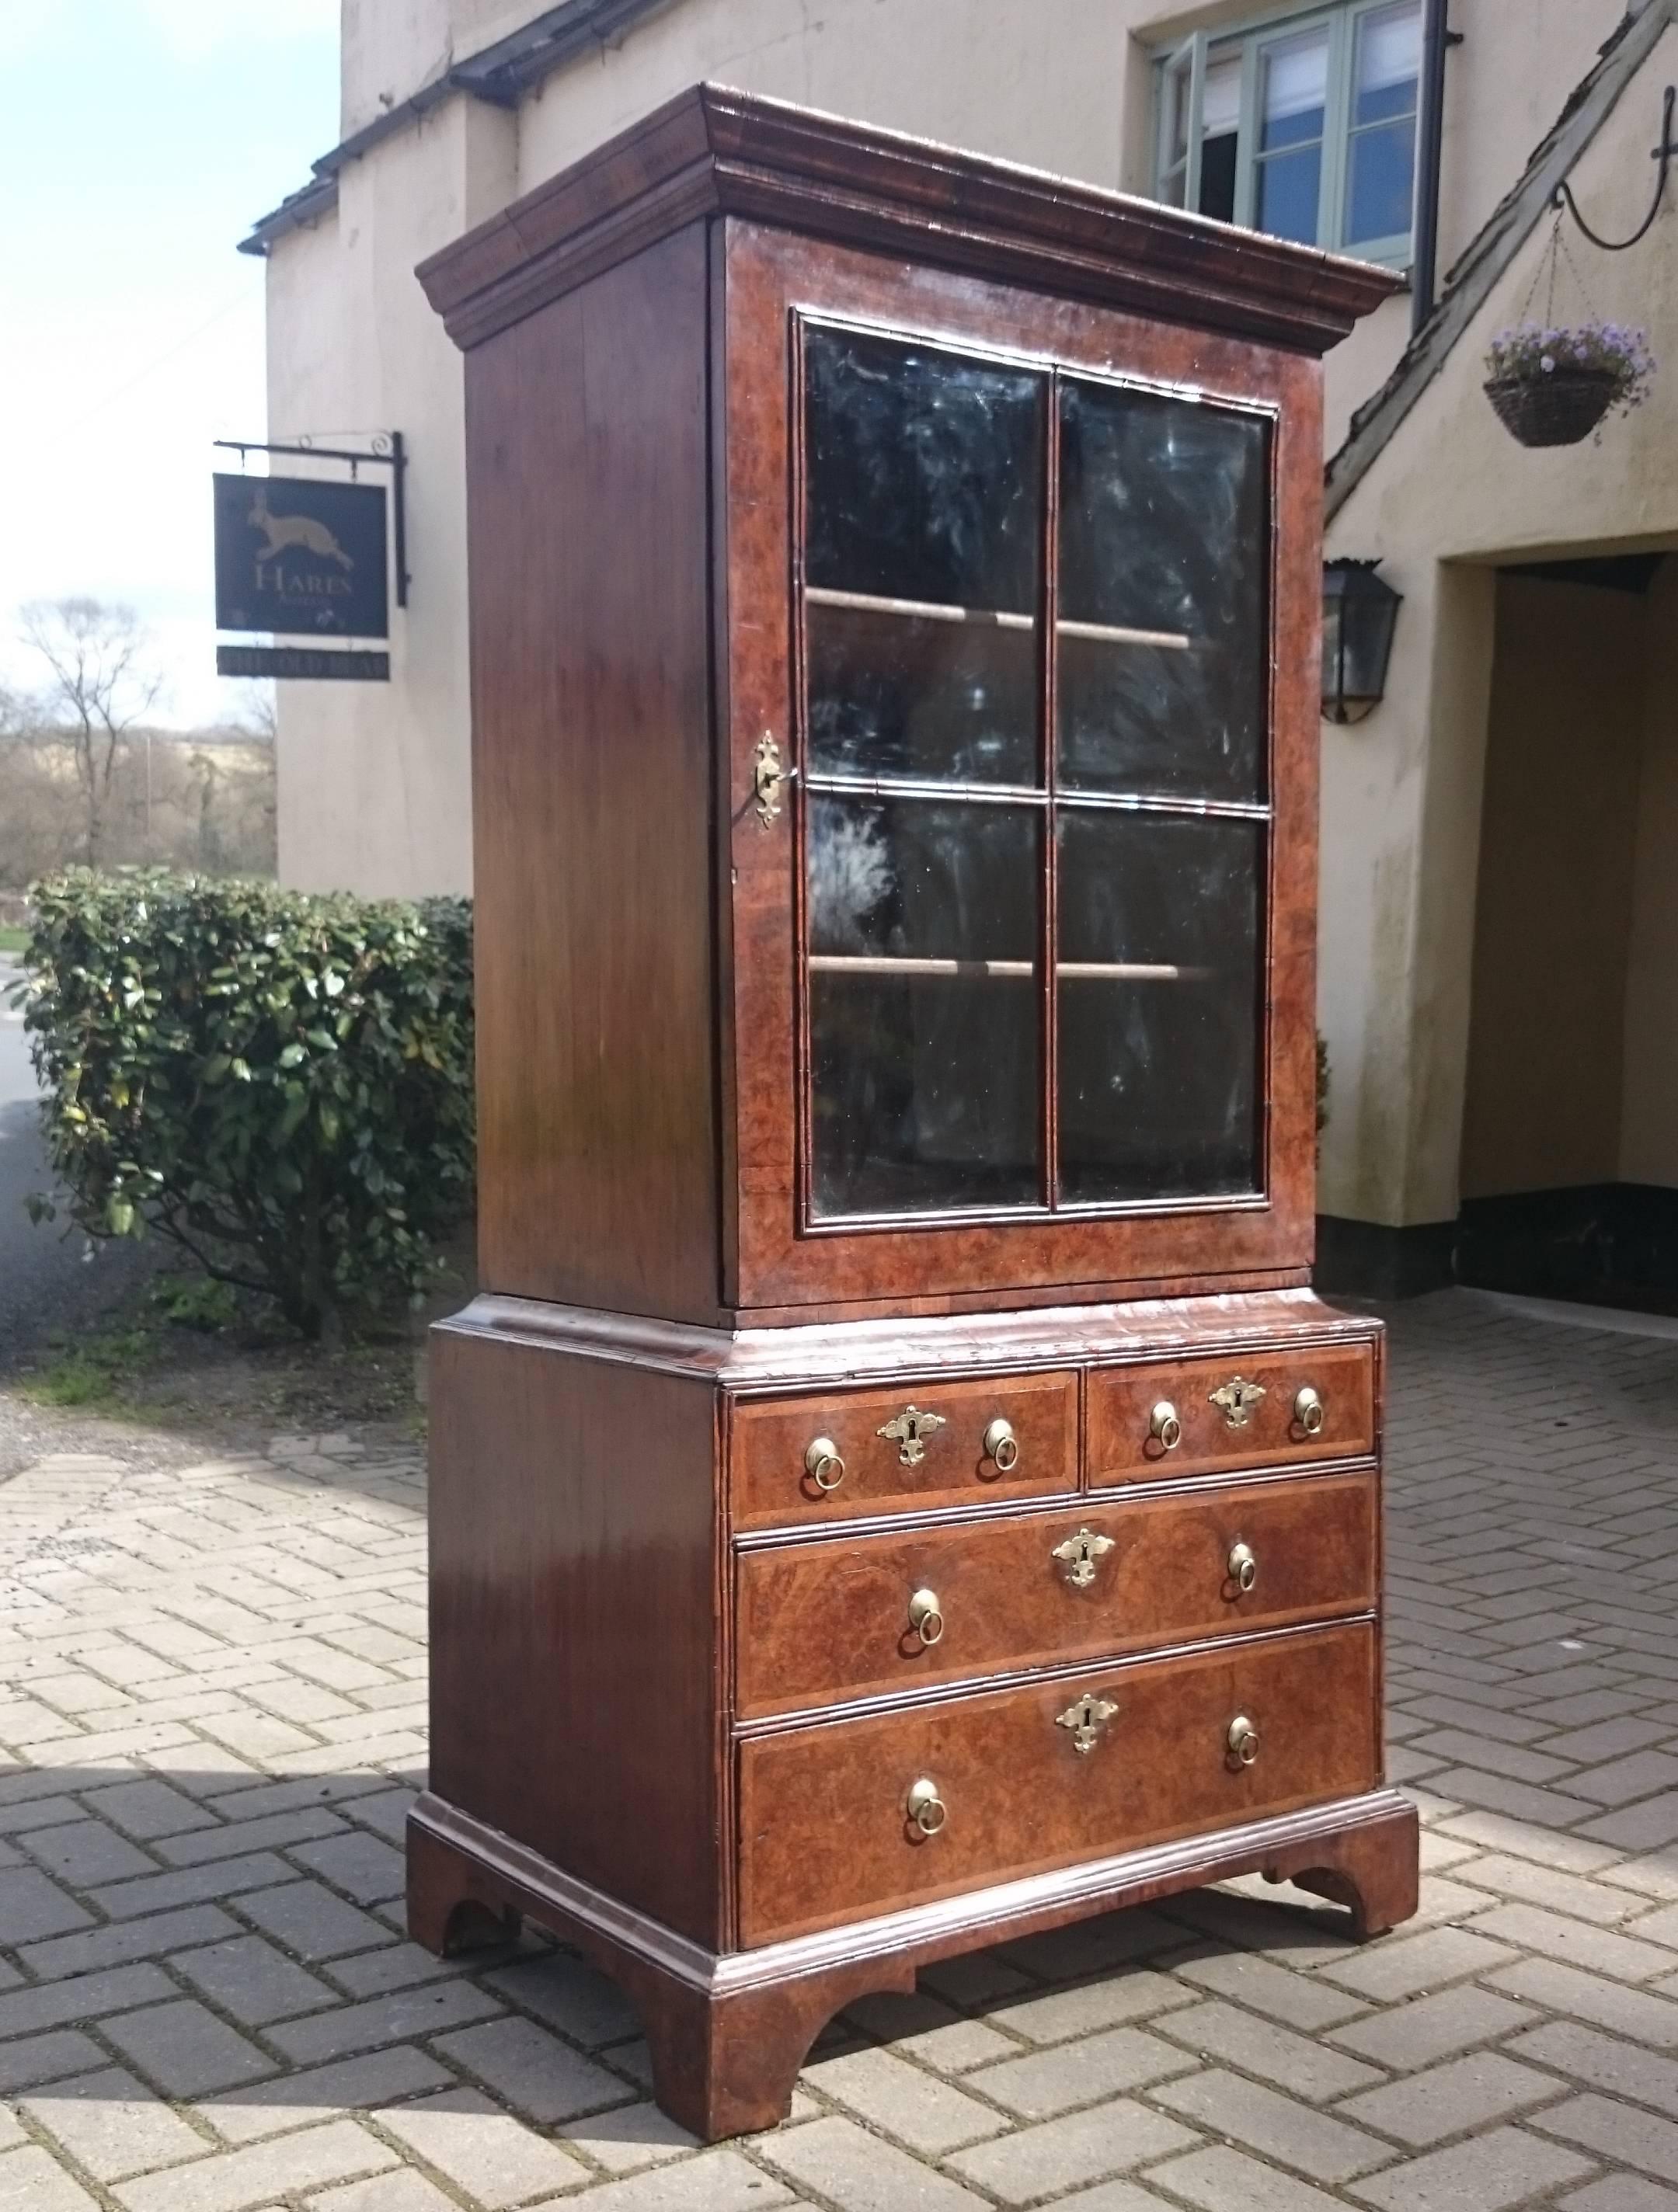 Early 18th century walnut cabinet or bookcase. This bookcase is made of burl walnut quarter cut veneer with feather banding around the drawers and pre-cockbeading double molded edge around the drawers and glazing. This is a very tactile piece of